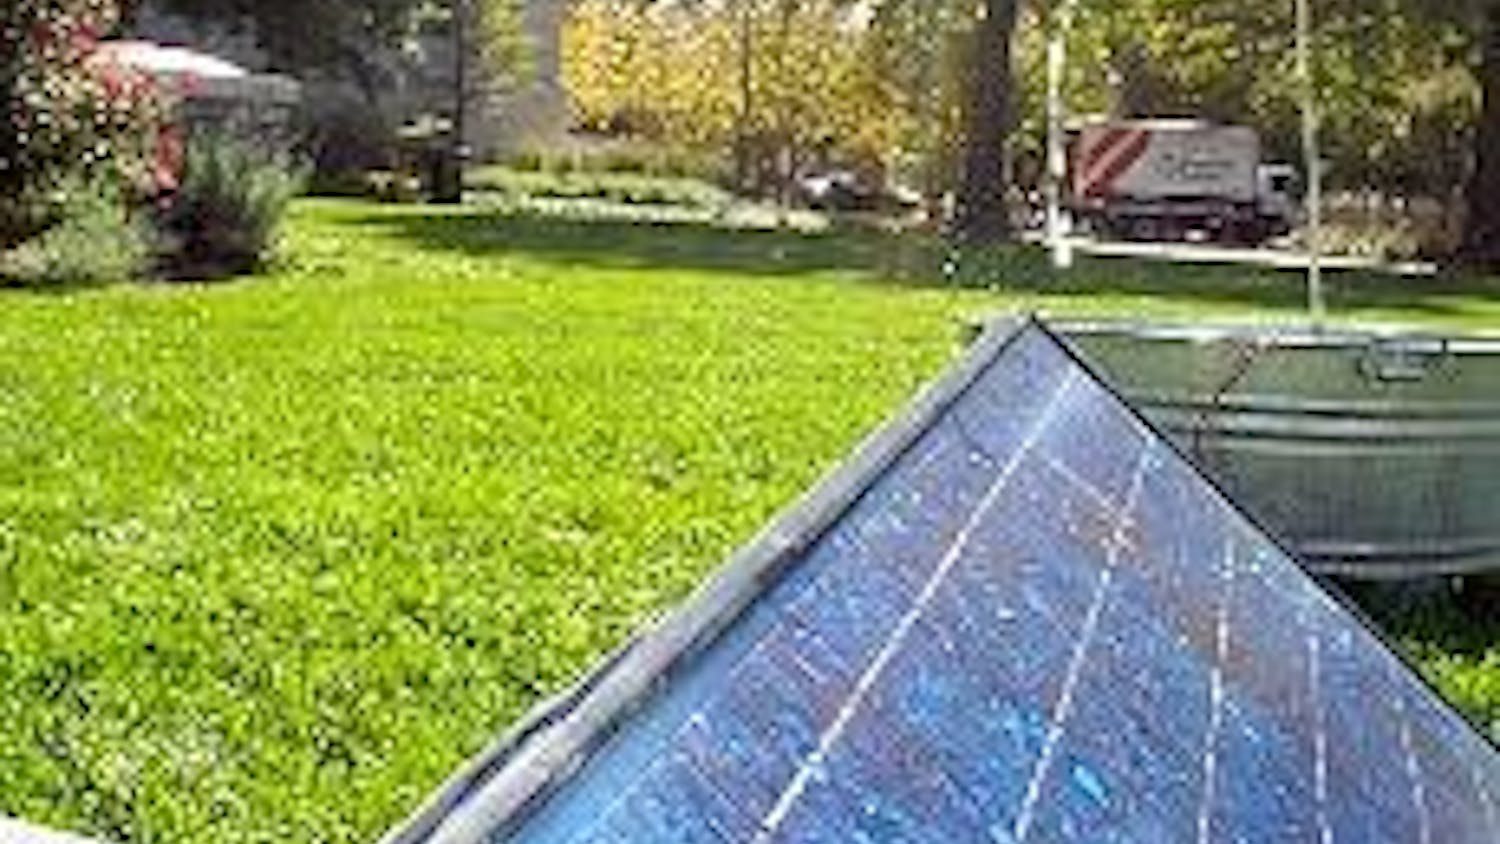 A solar fountain trickles water on the quad Oct. 25 to demonstrate sustainable technology as part of Campus Sustainability Week.